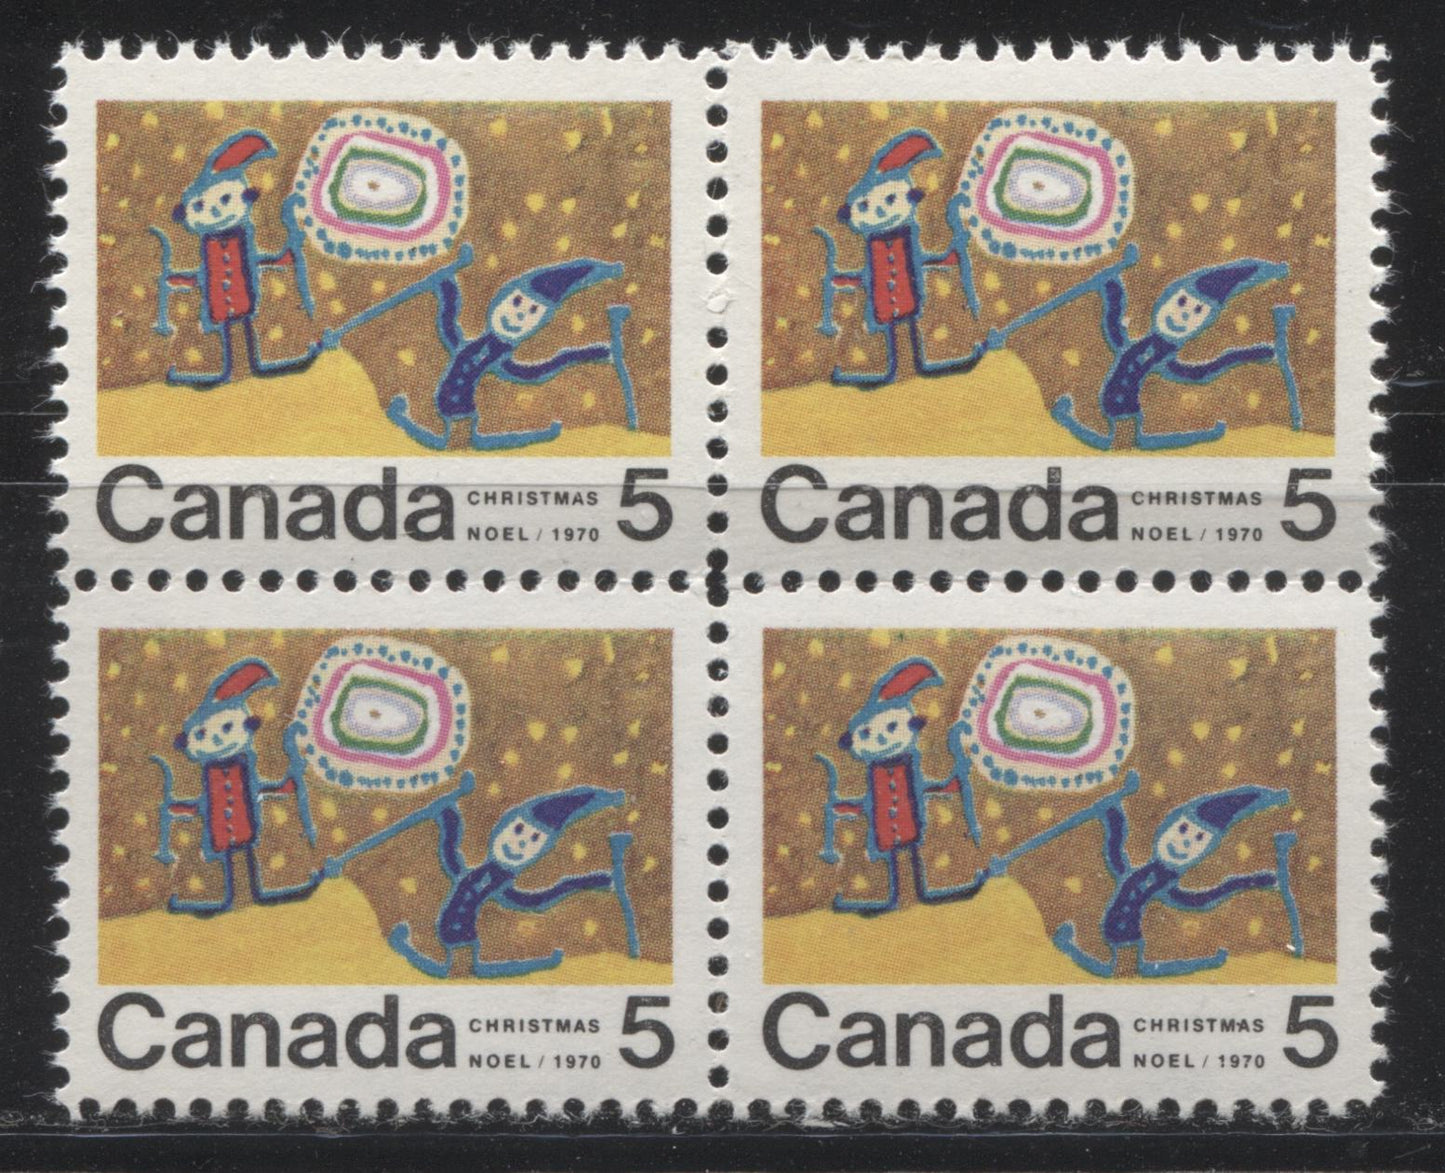 Lot 294 Canada #522i 5c Multicoloured Children Skiing, 1970 Christmas Issue, a VFNH Centre Block of 4 on HB11 Ribbed Paper, With Dot Between "MA" of "Christmas" on LR Stamp, Perf. 11.9 x 11.85